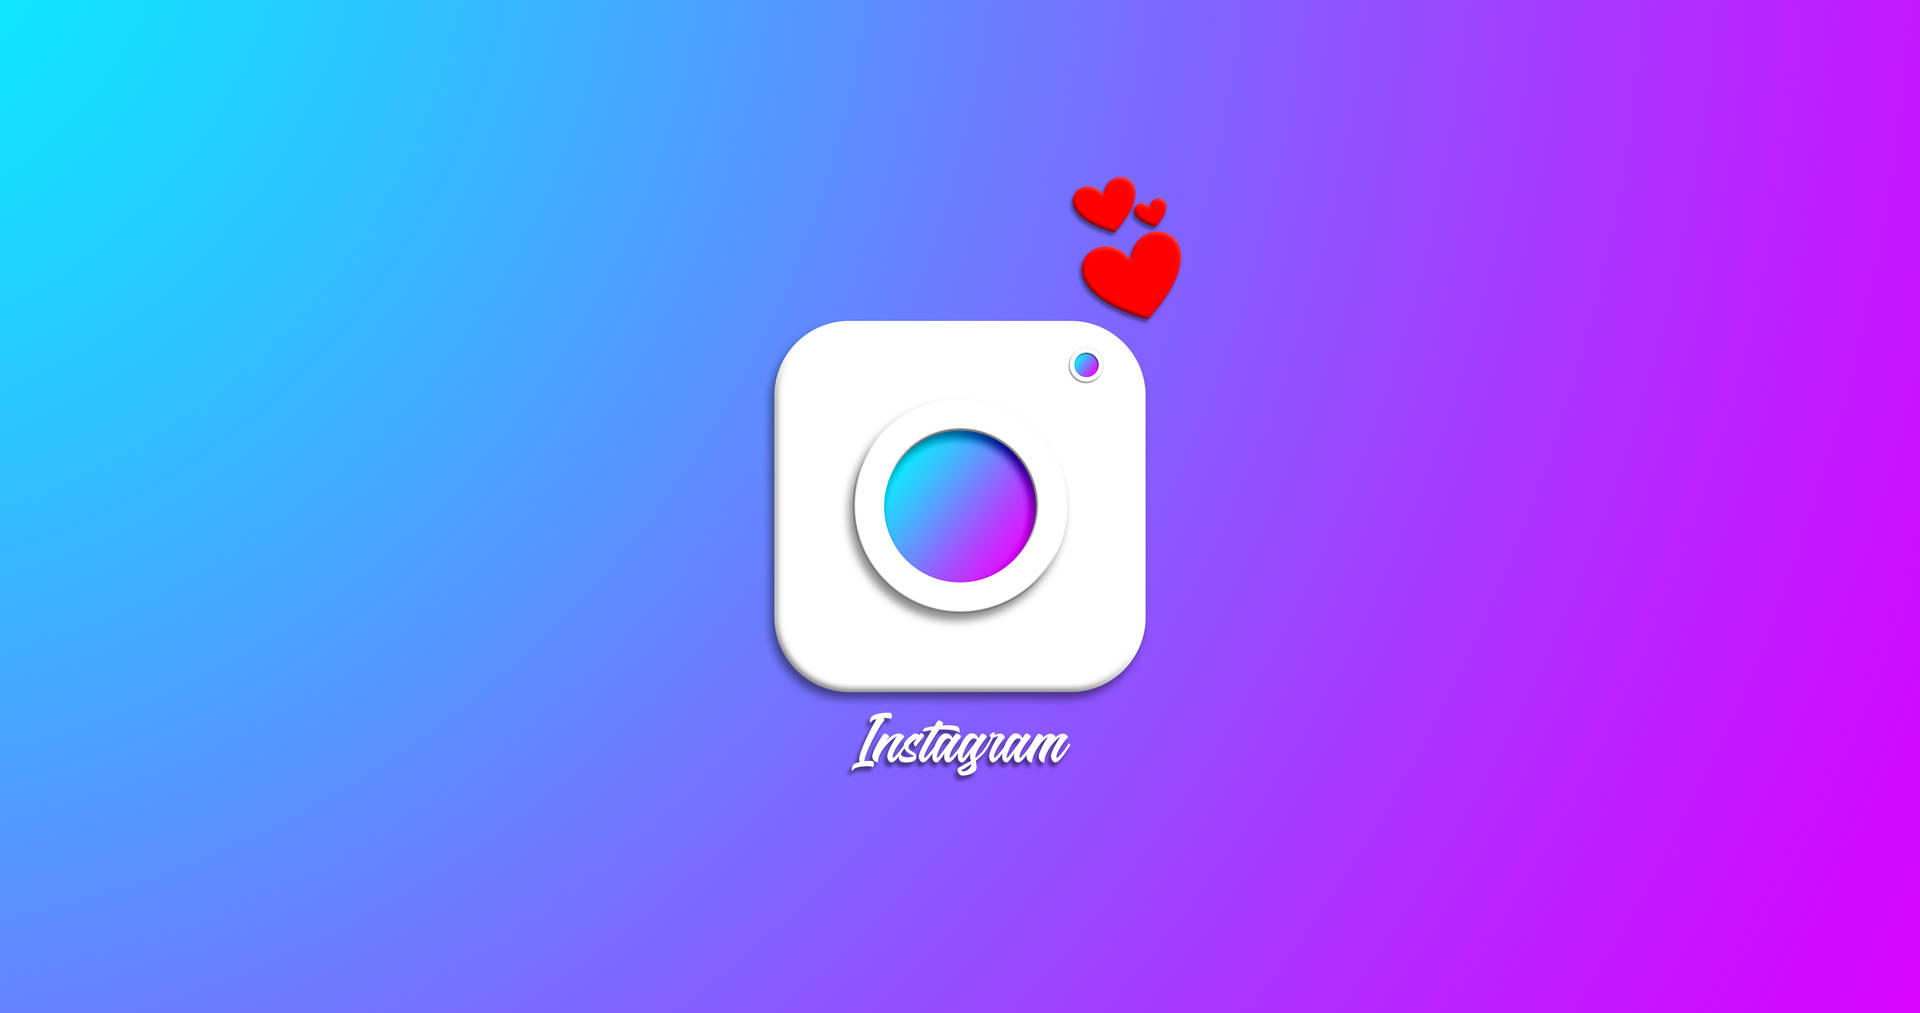 Cute Instagram Logo With Heart Background